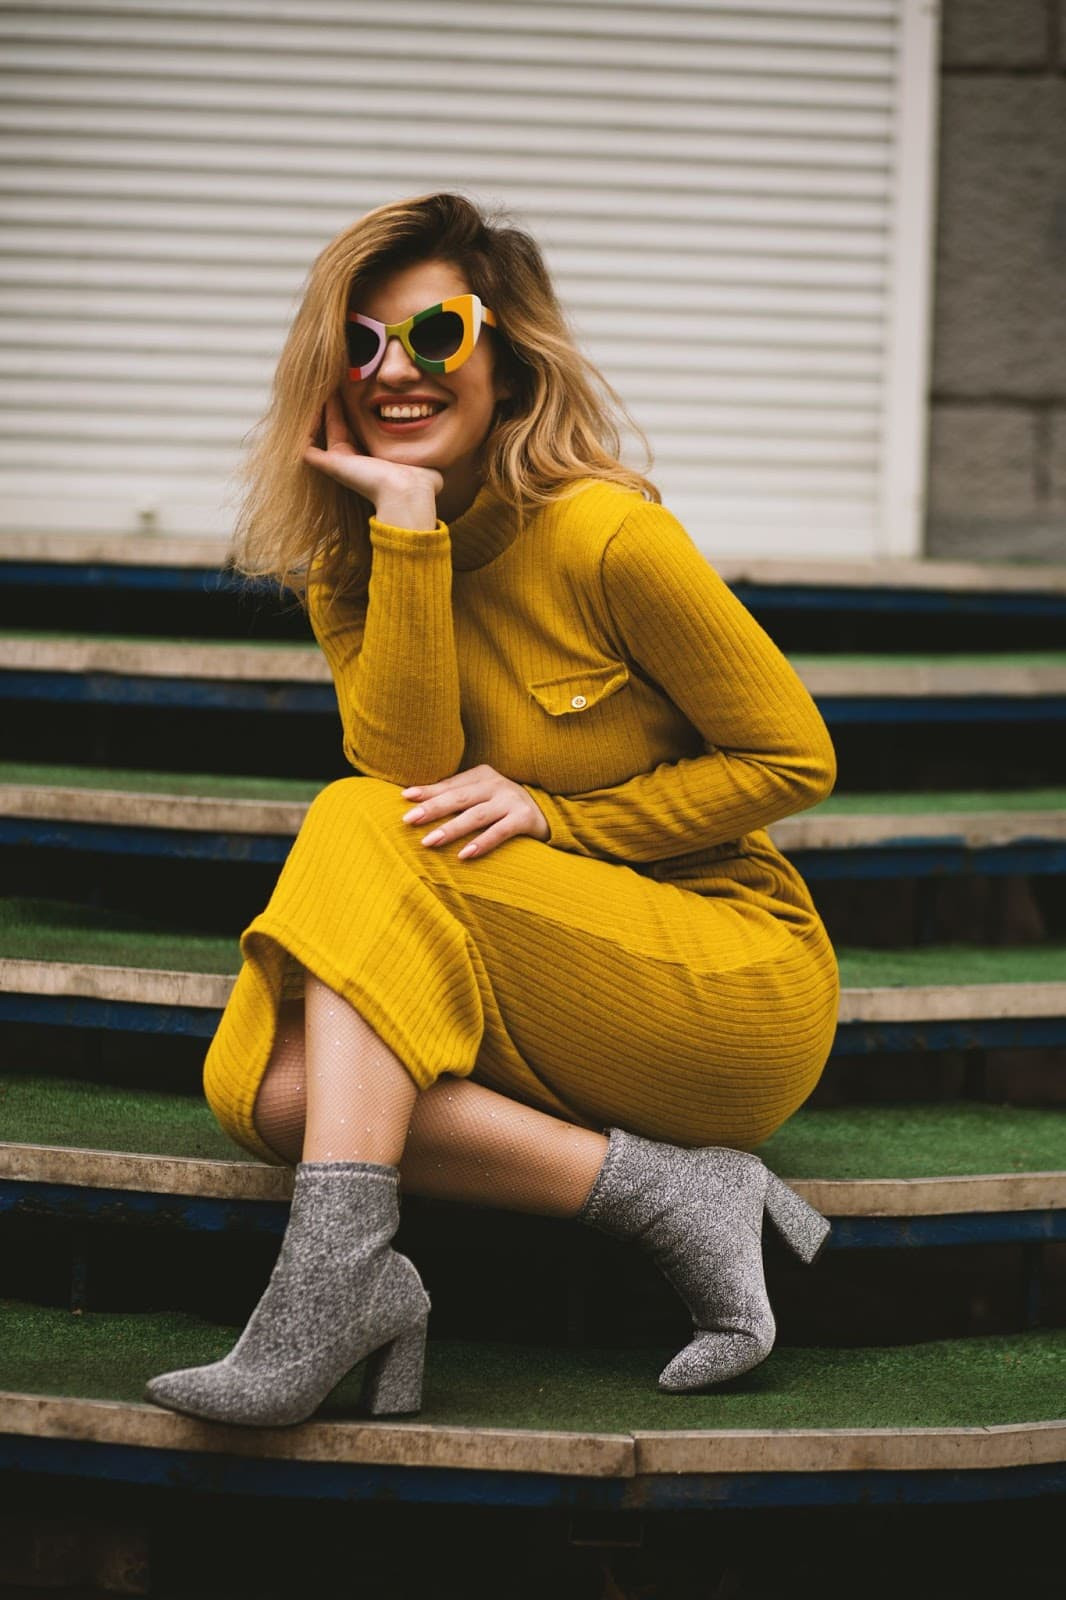 https://www.societystylist.com/images/2_shoes-to-wear-with-dresses-in-winter-chic-and-cozy-choices.jpg